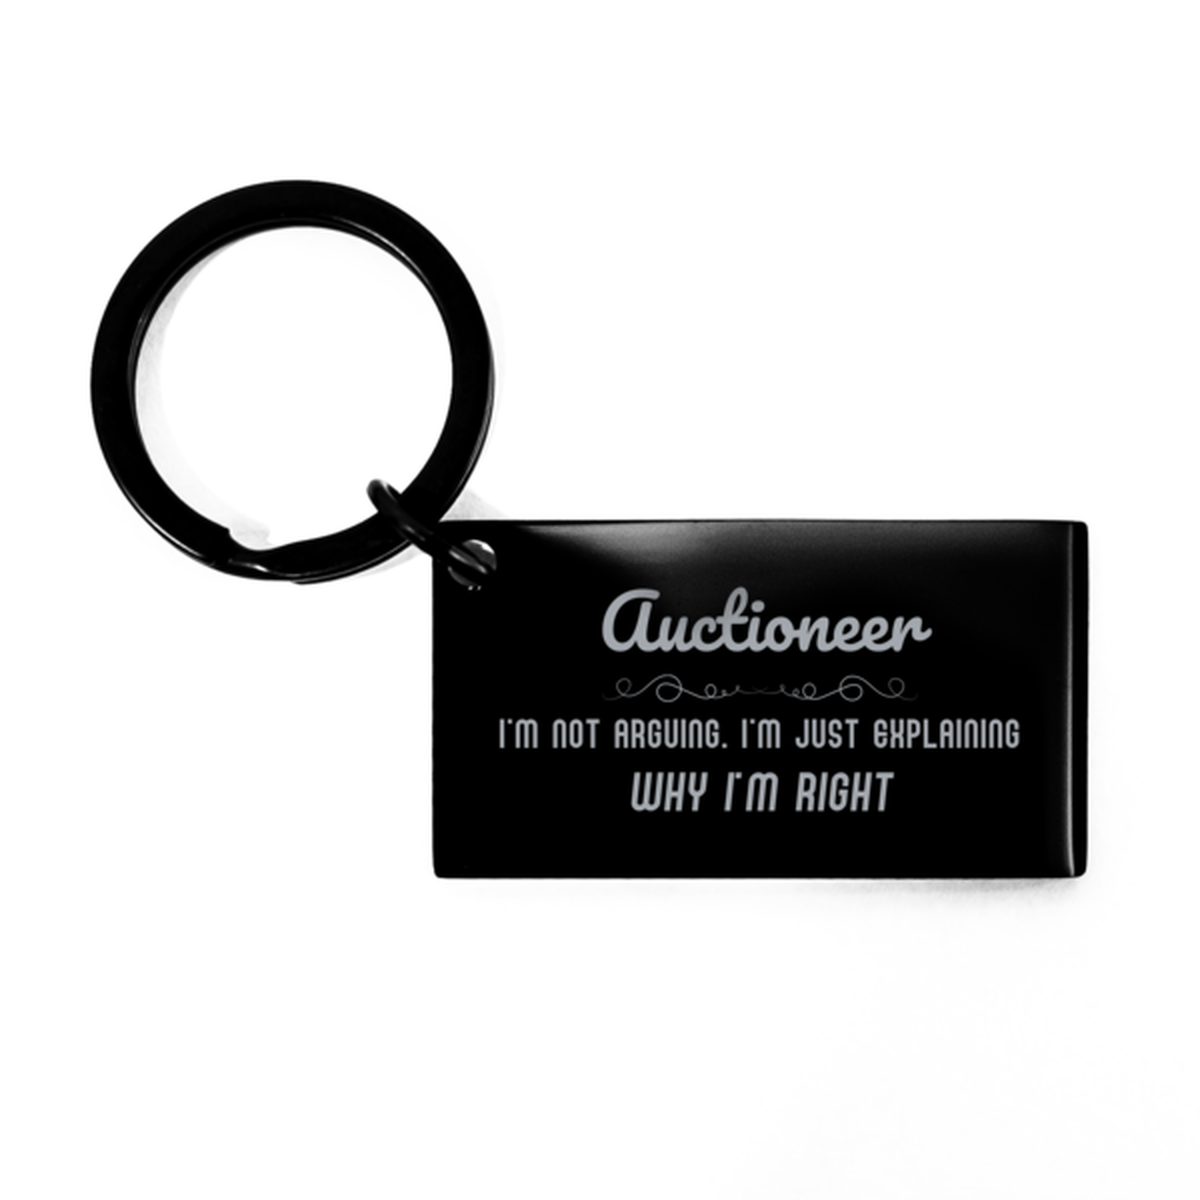 Auctioneer I'm not Arguing. I'm Just Explaining Why I'm RIGHT Keychain, Funny Saying Quote Auctioneer Gifts For Auctioneer Graduation Birthday Christmas Gifts for Men Women Coworker